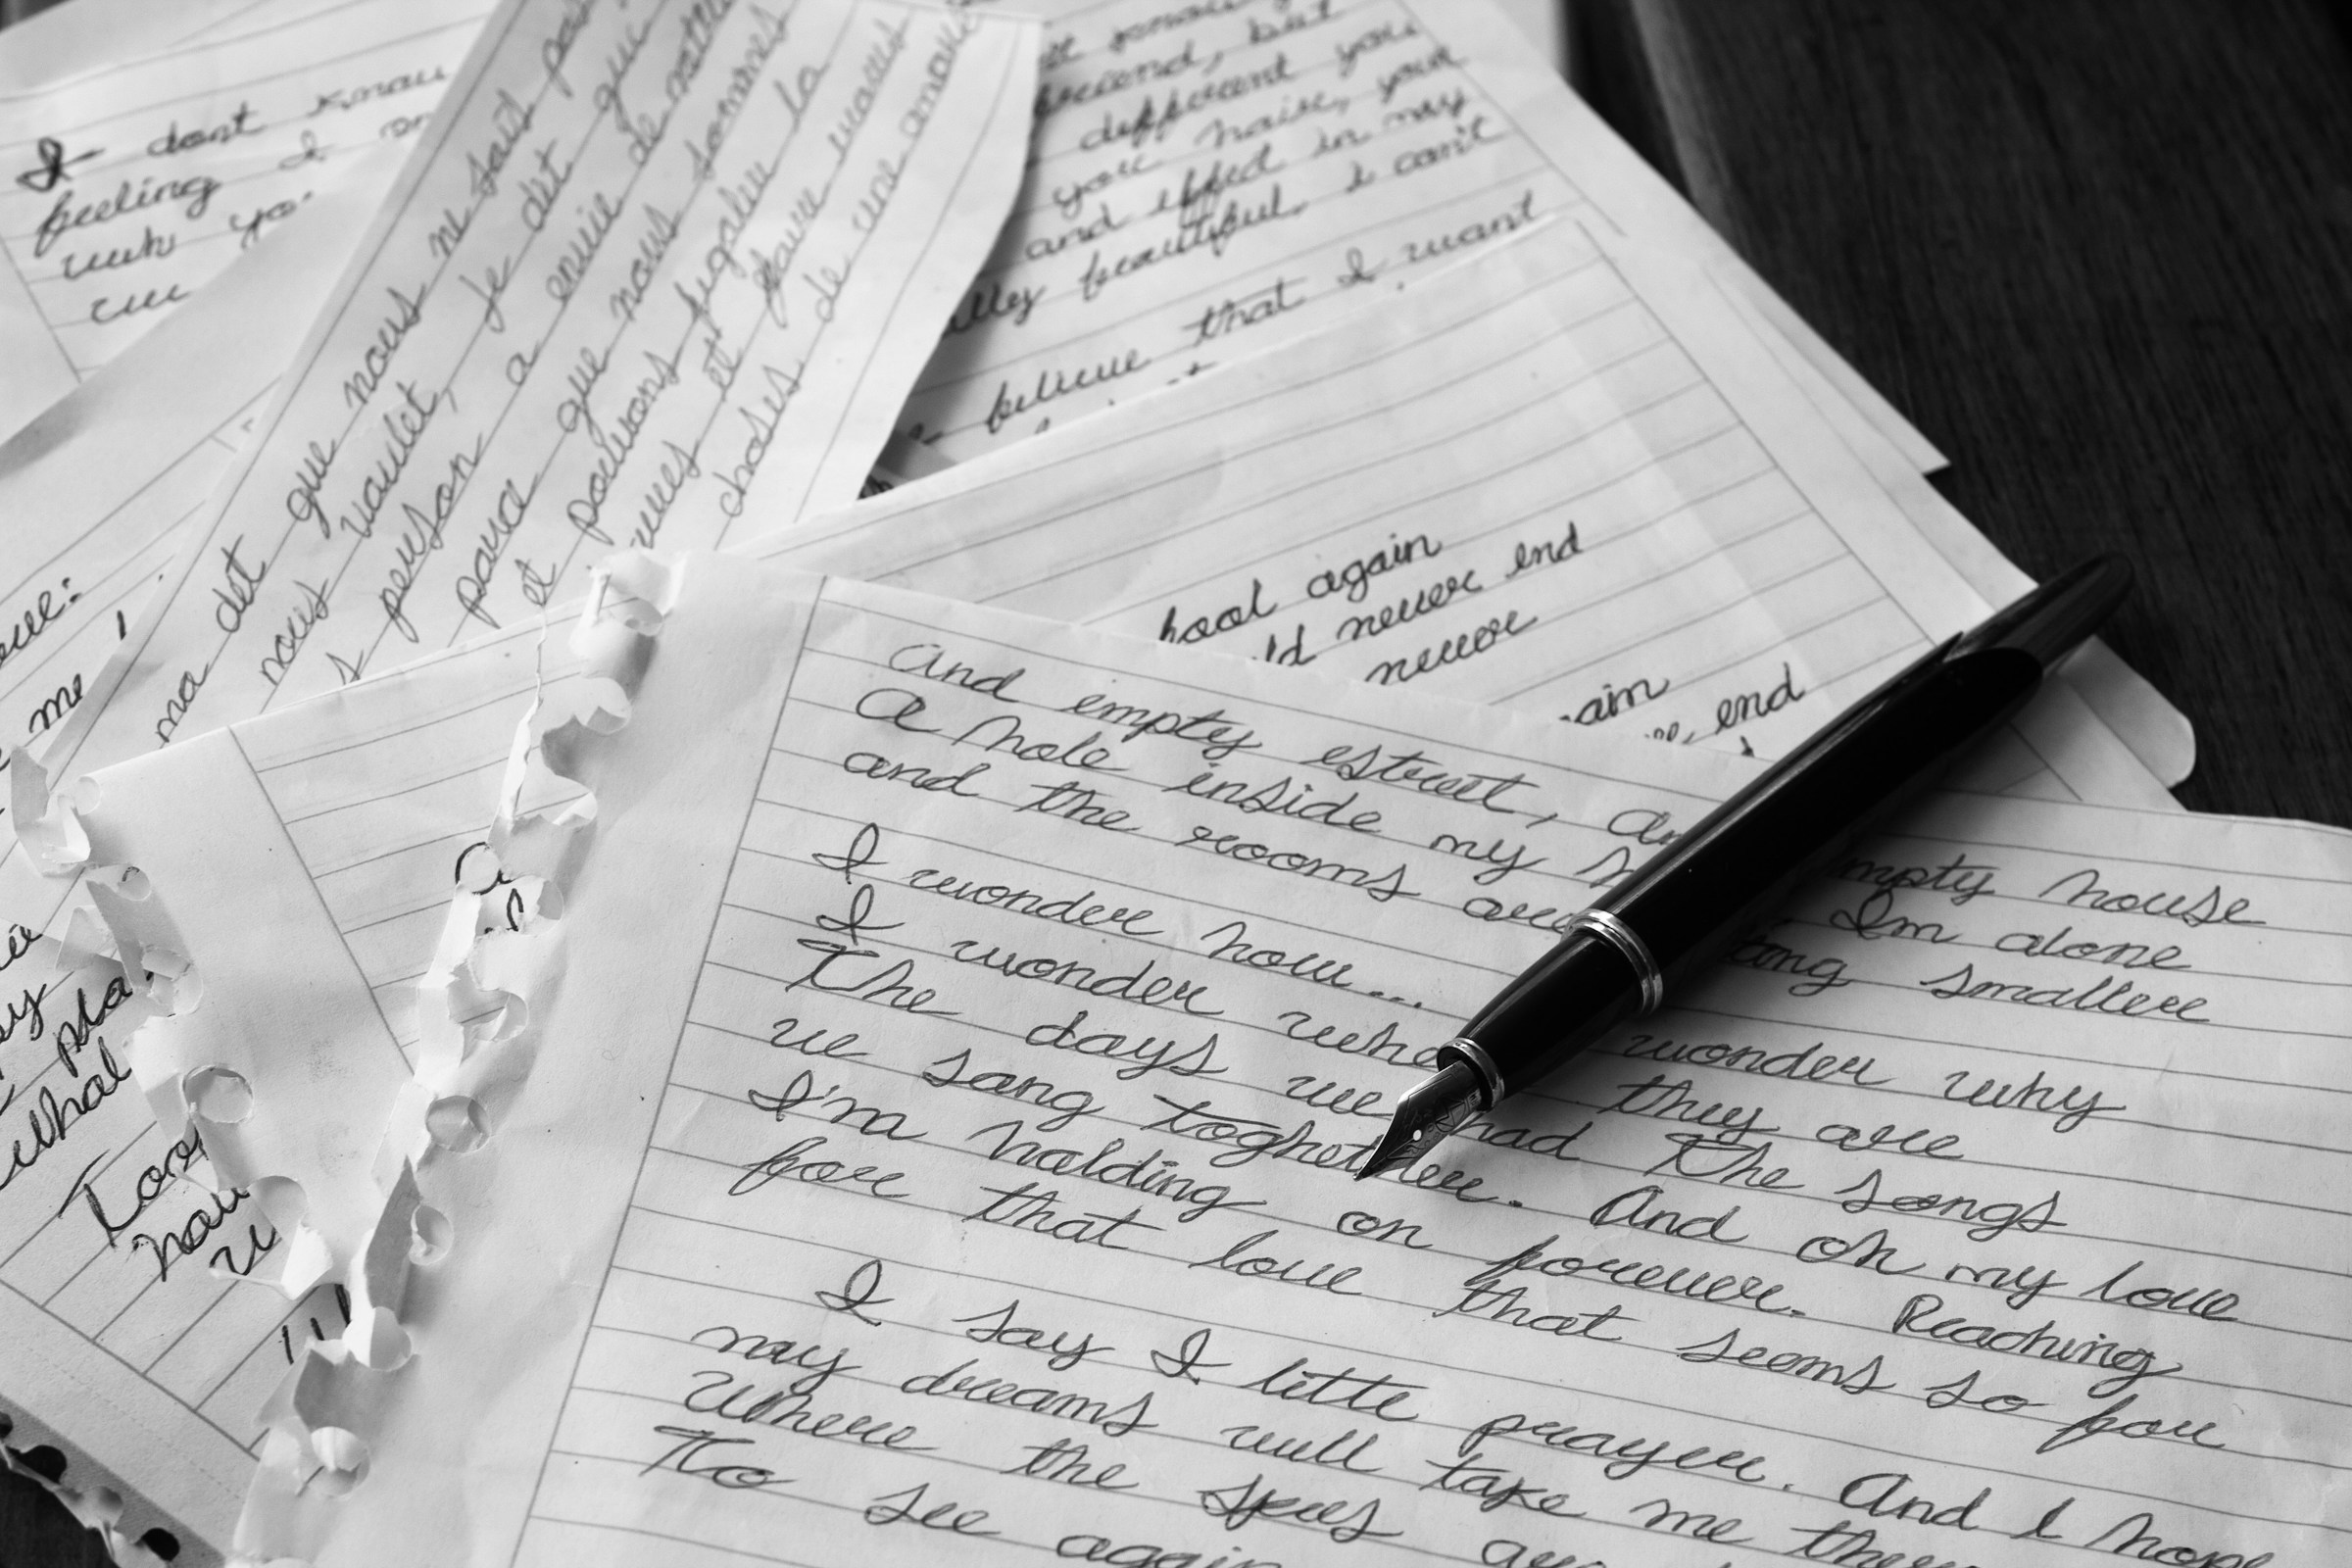 A pen lying on pieces of white paper with something written on them | Source: Unsplash